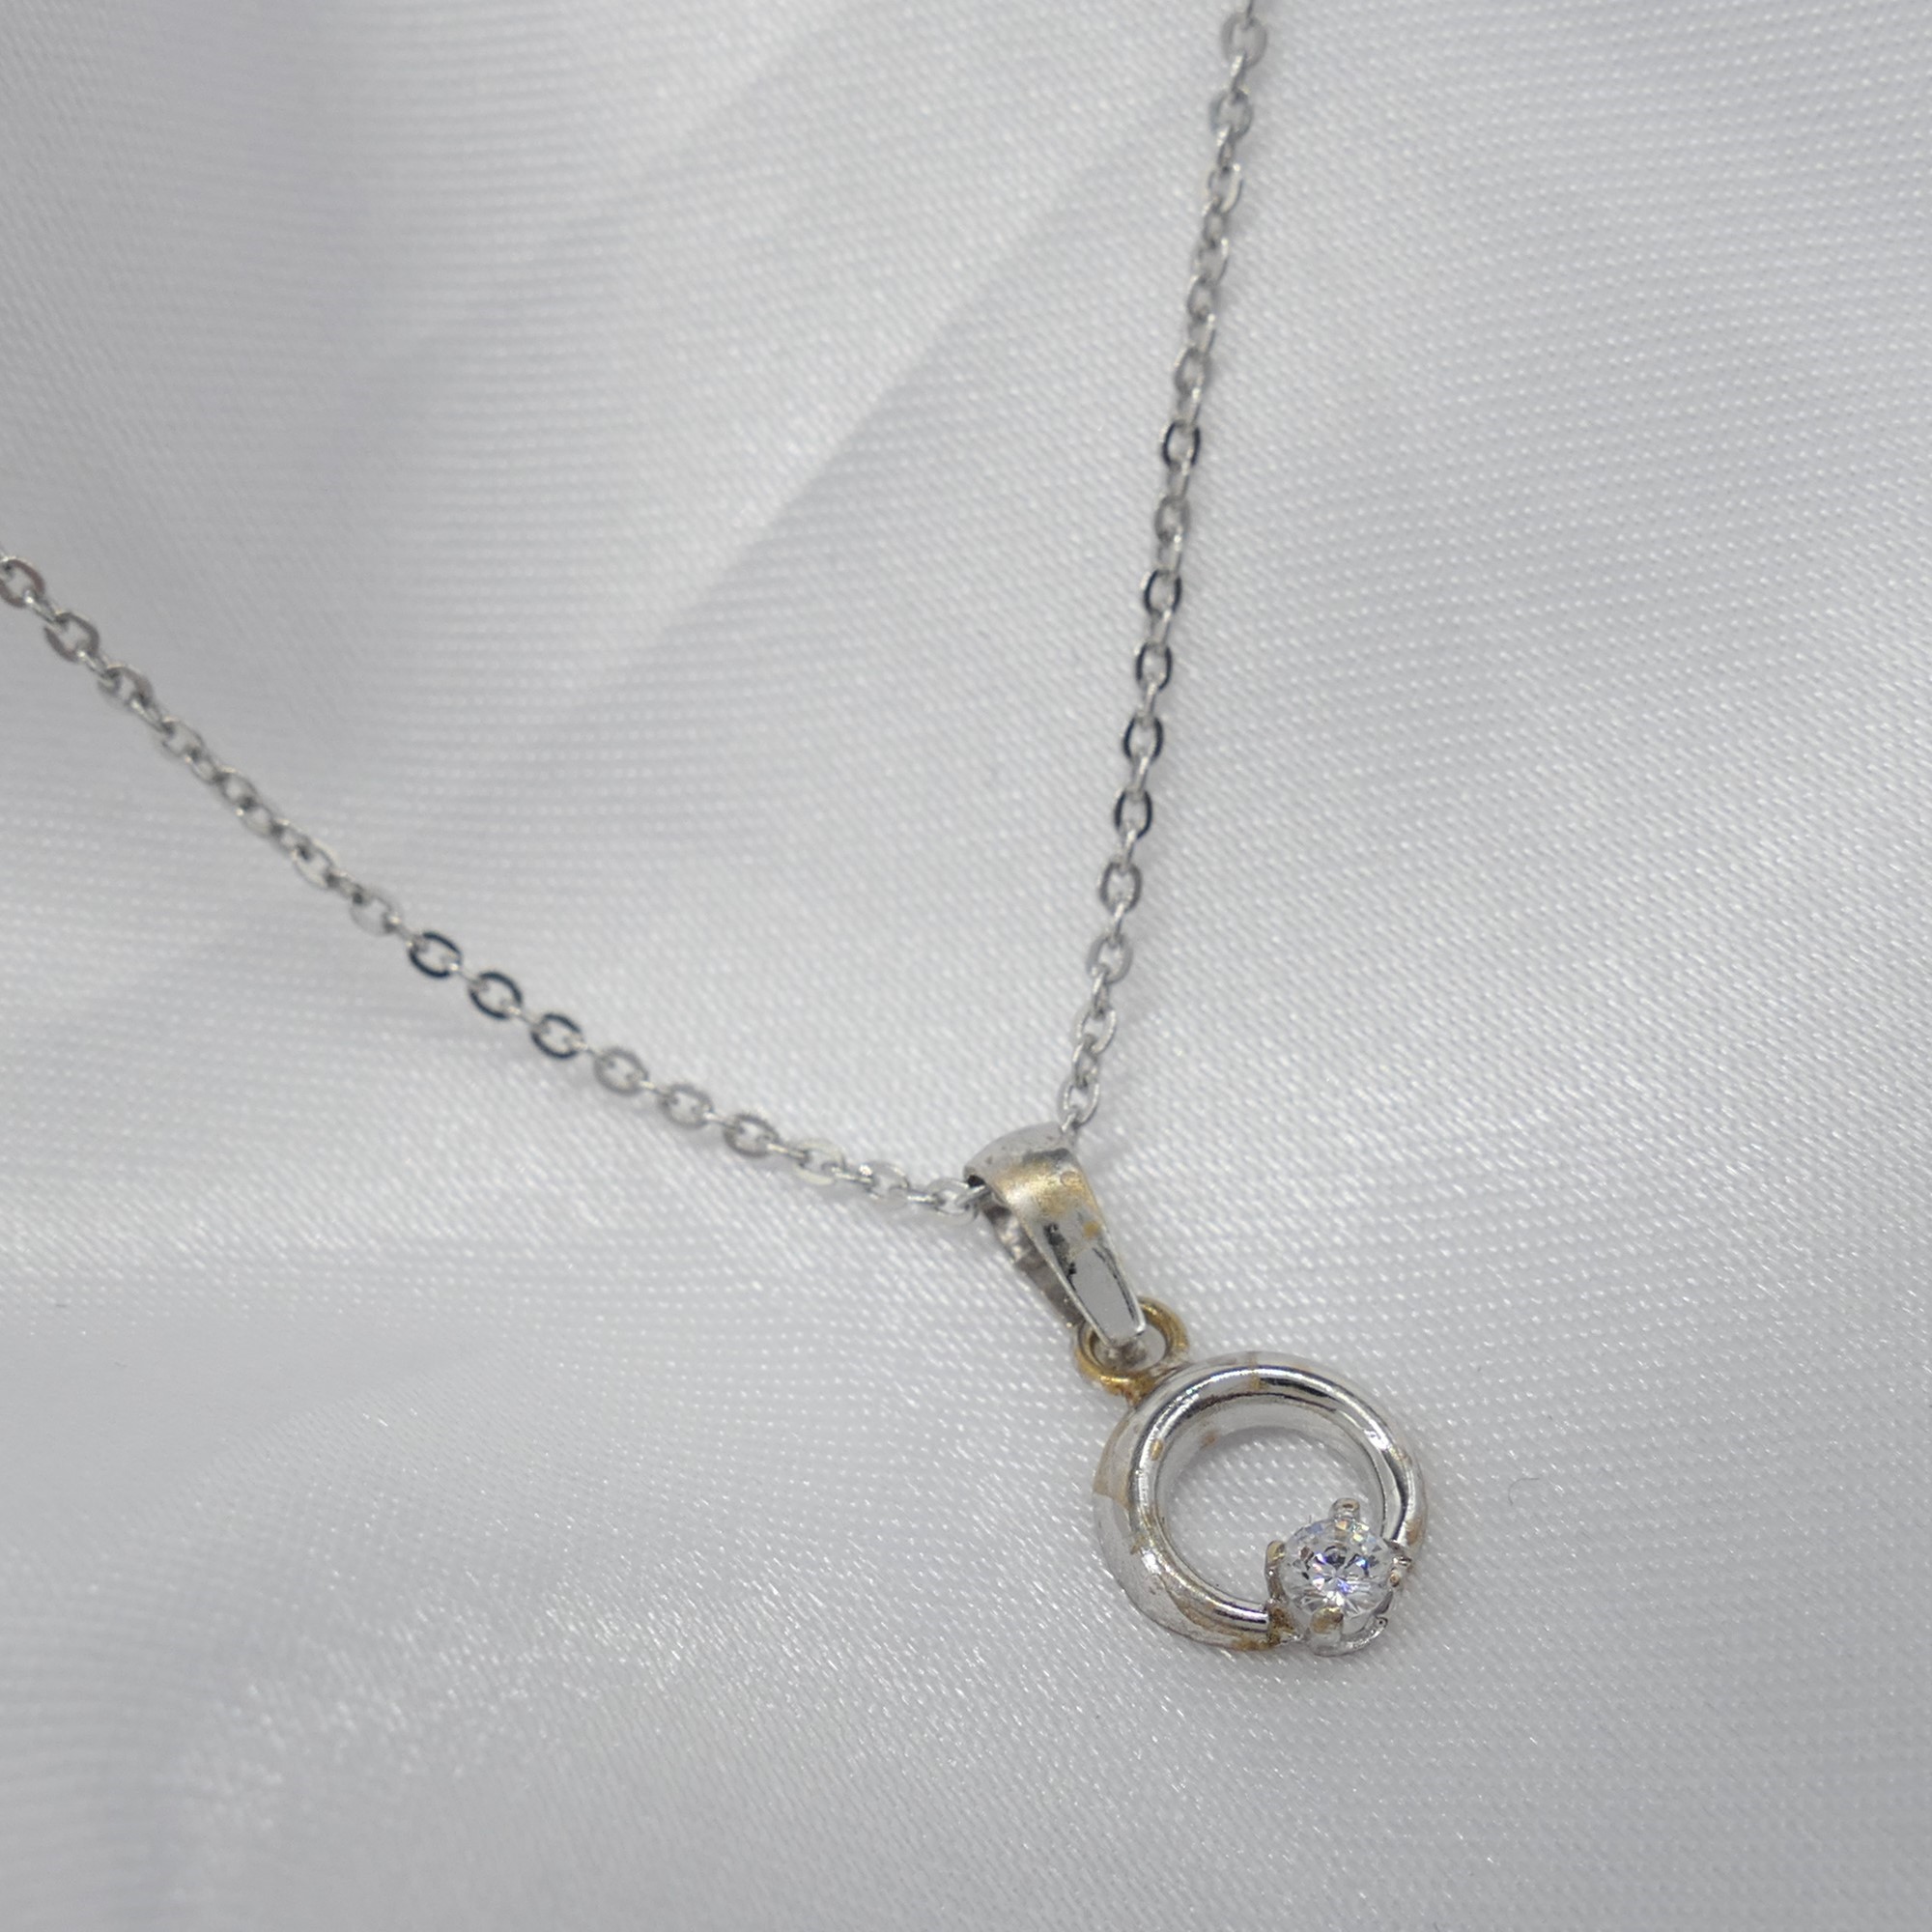 18 Carat White Gold and Silver, Cubic Zirconia-Set Pendant With Silver Chain, Boxed - Image 6 of 6